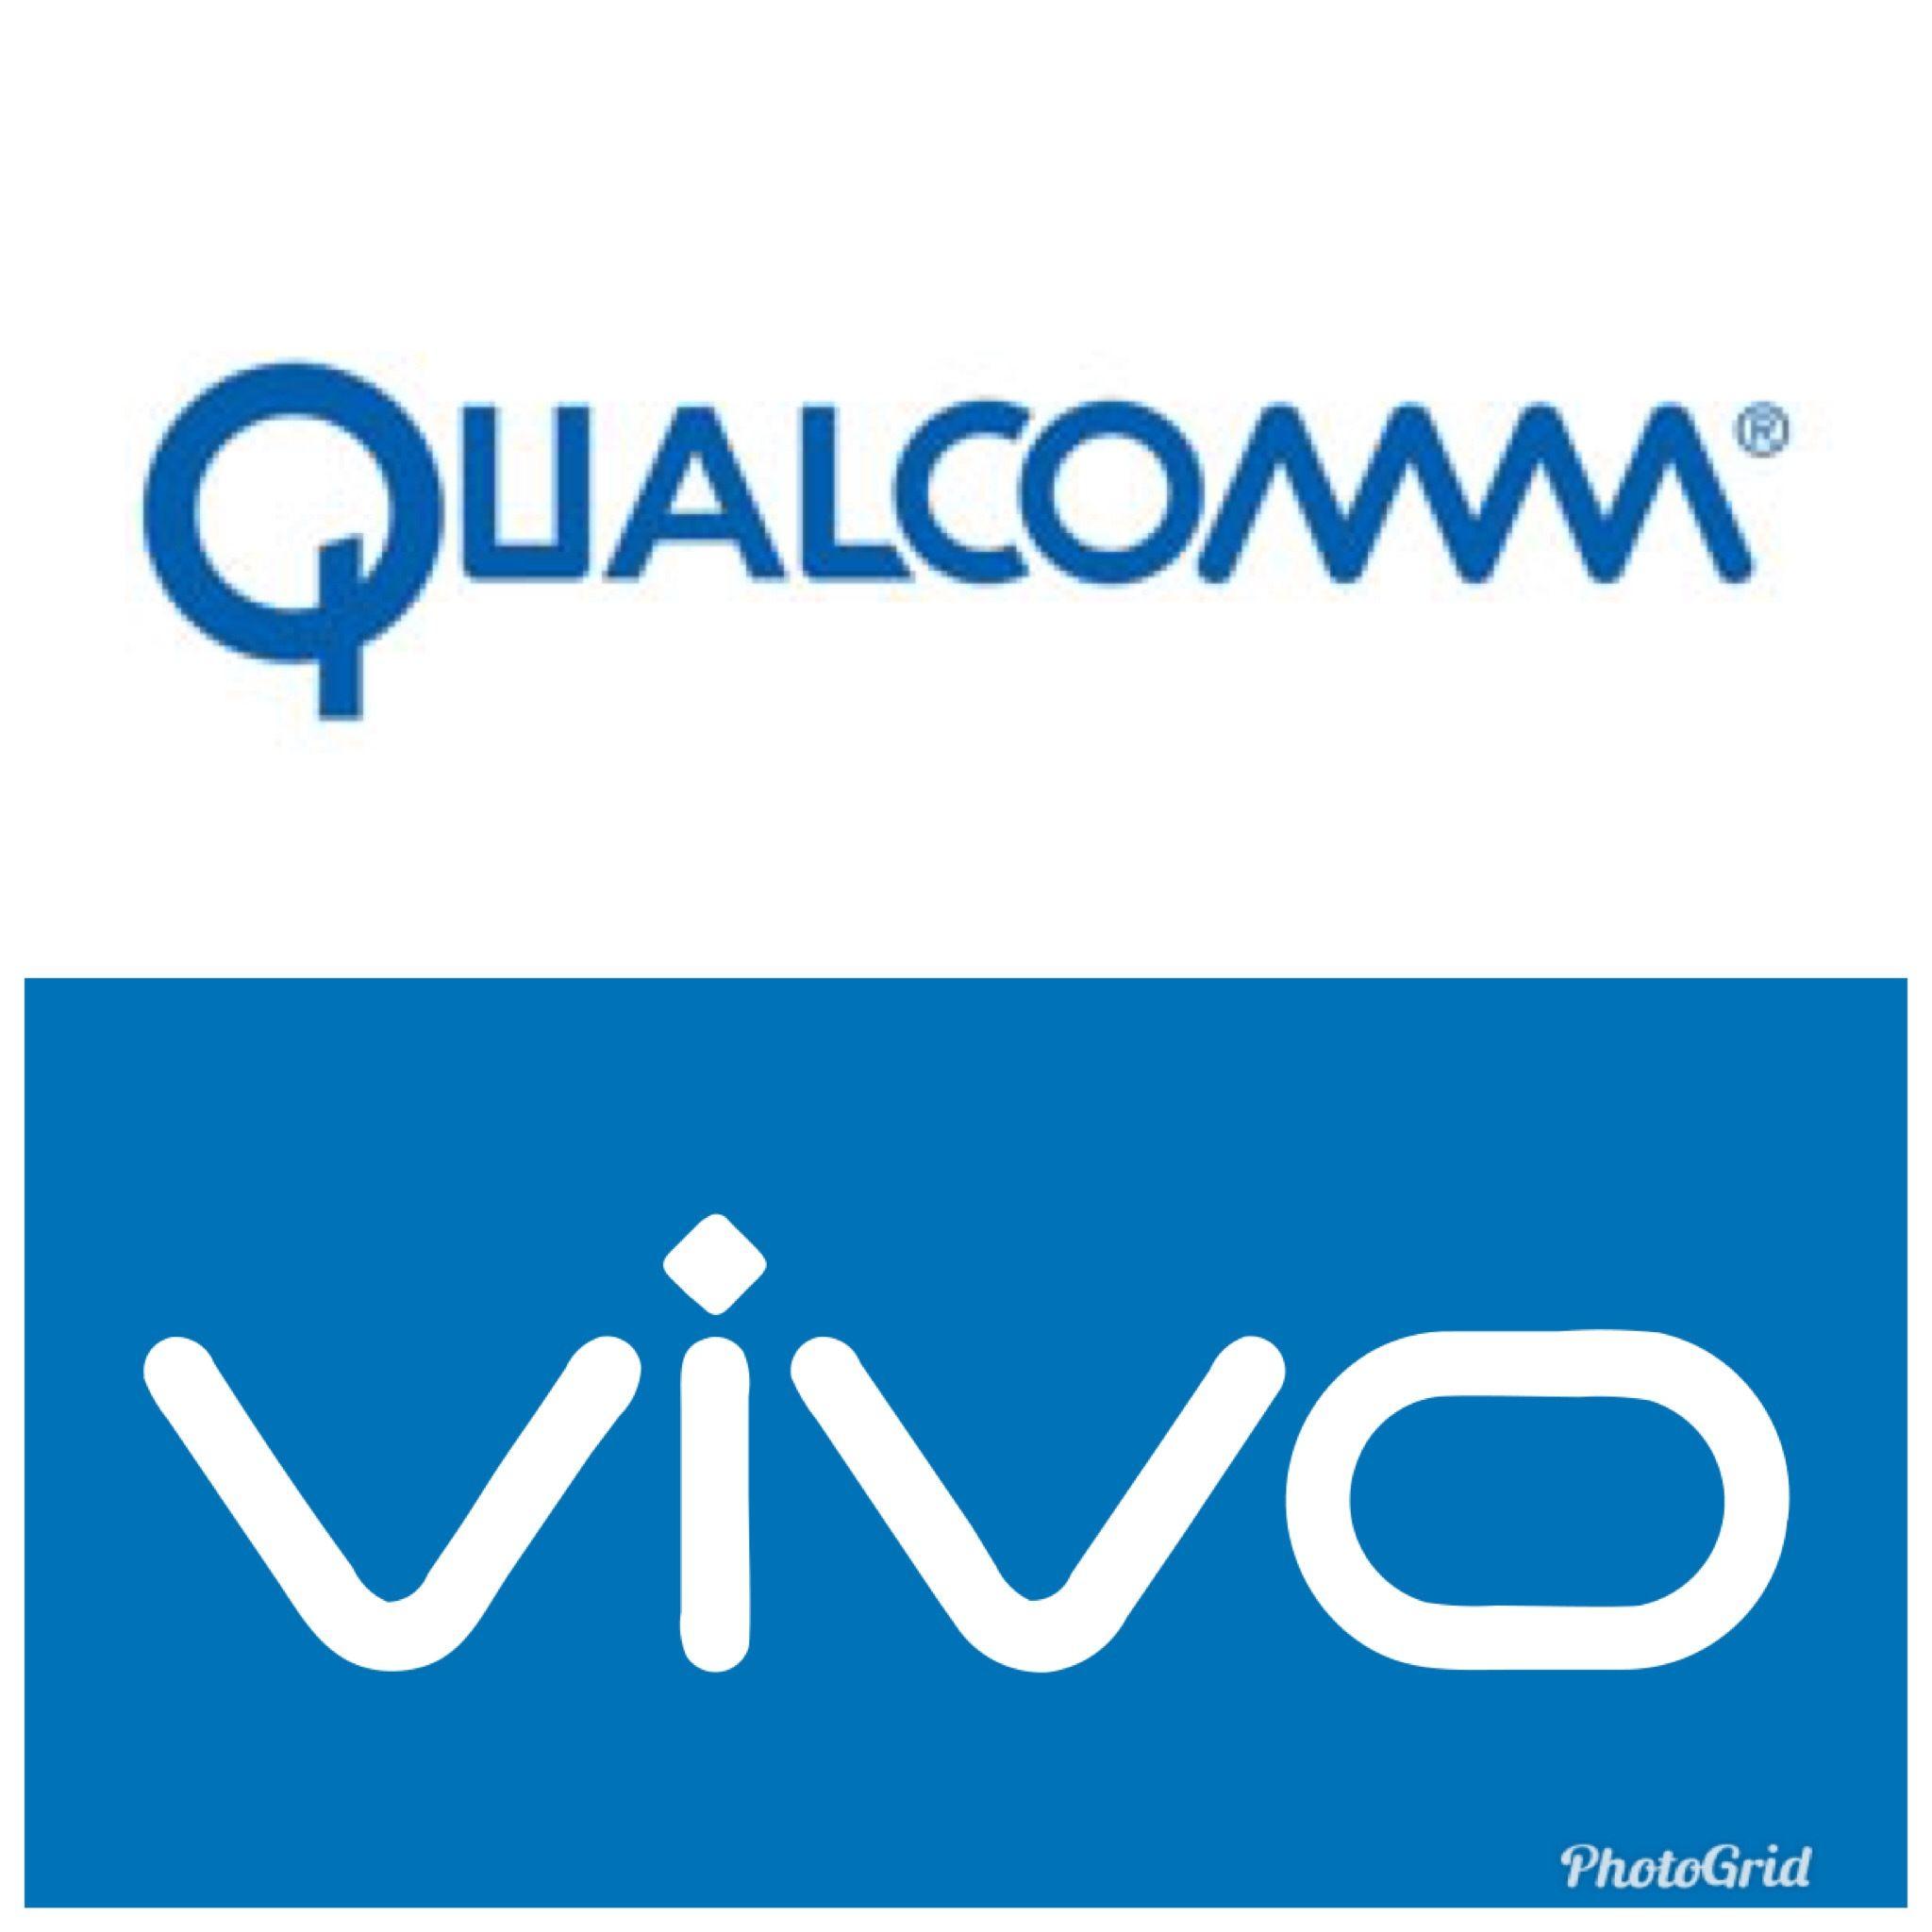 Vivo Phone Logo - Vivo strengthens top position in the mobile phone industry with a 4